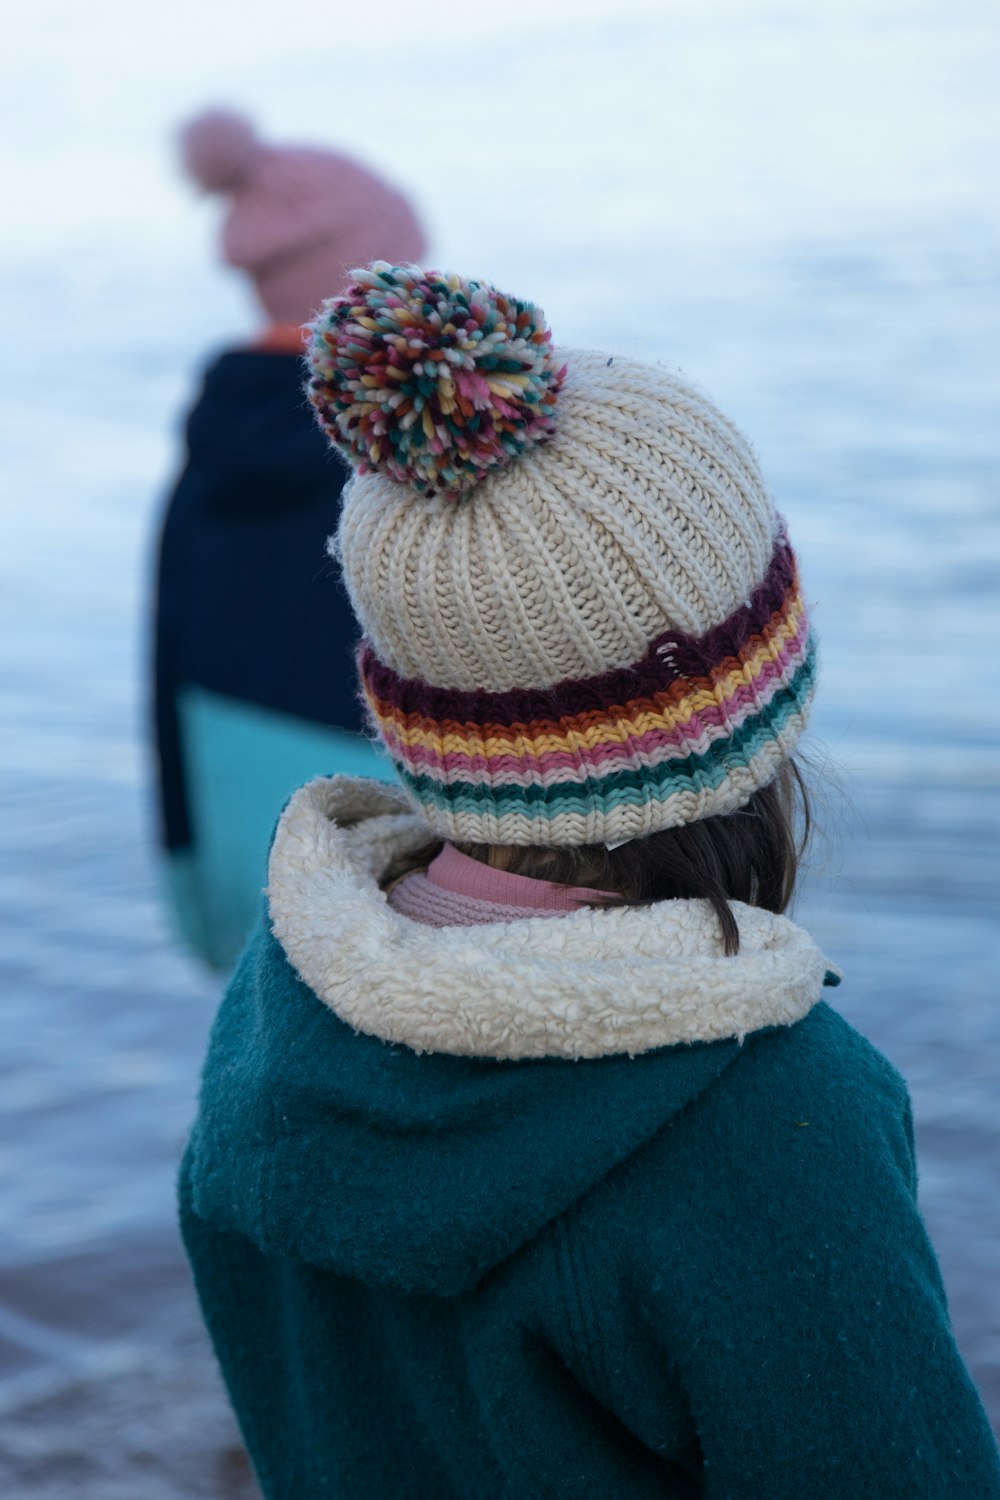 a person wearing a hat and a coat by a body of water